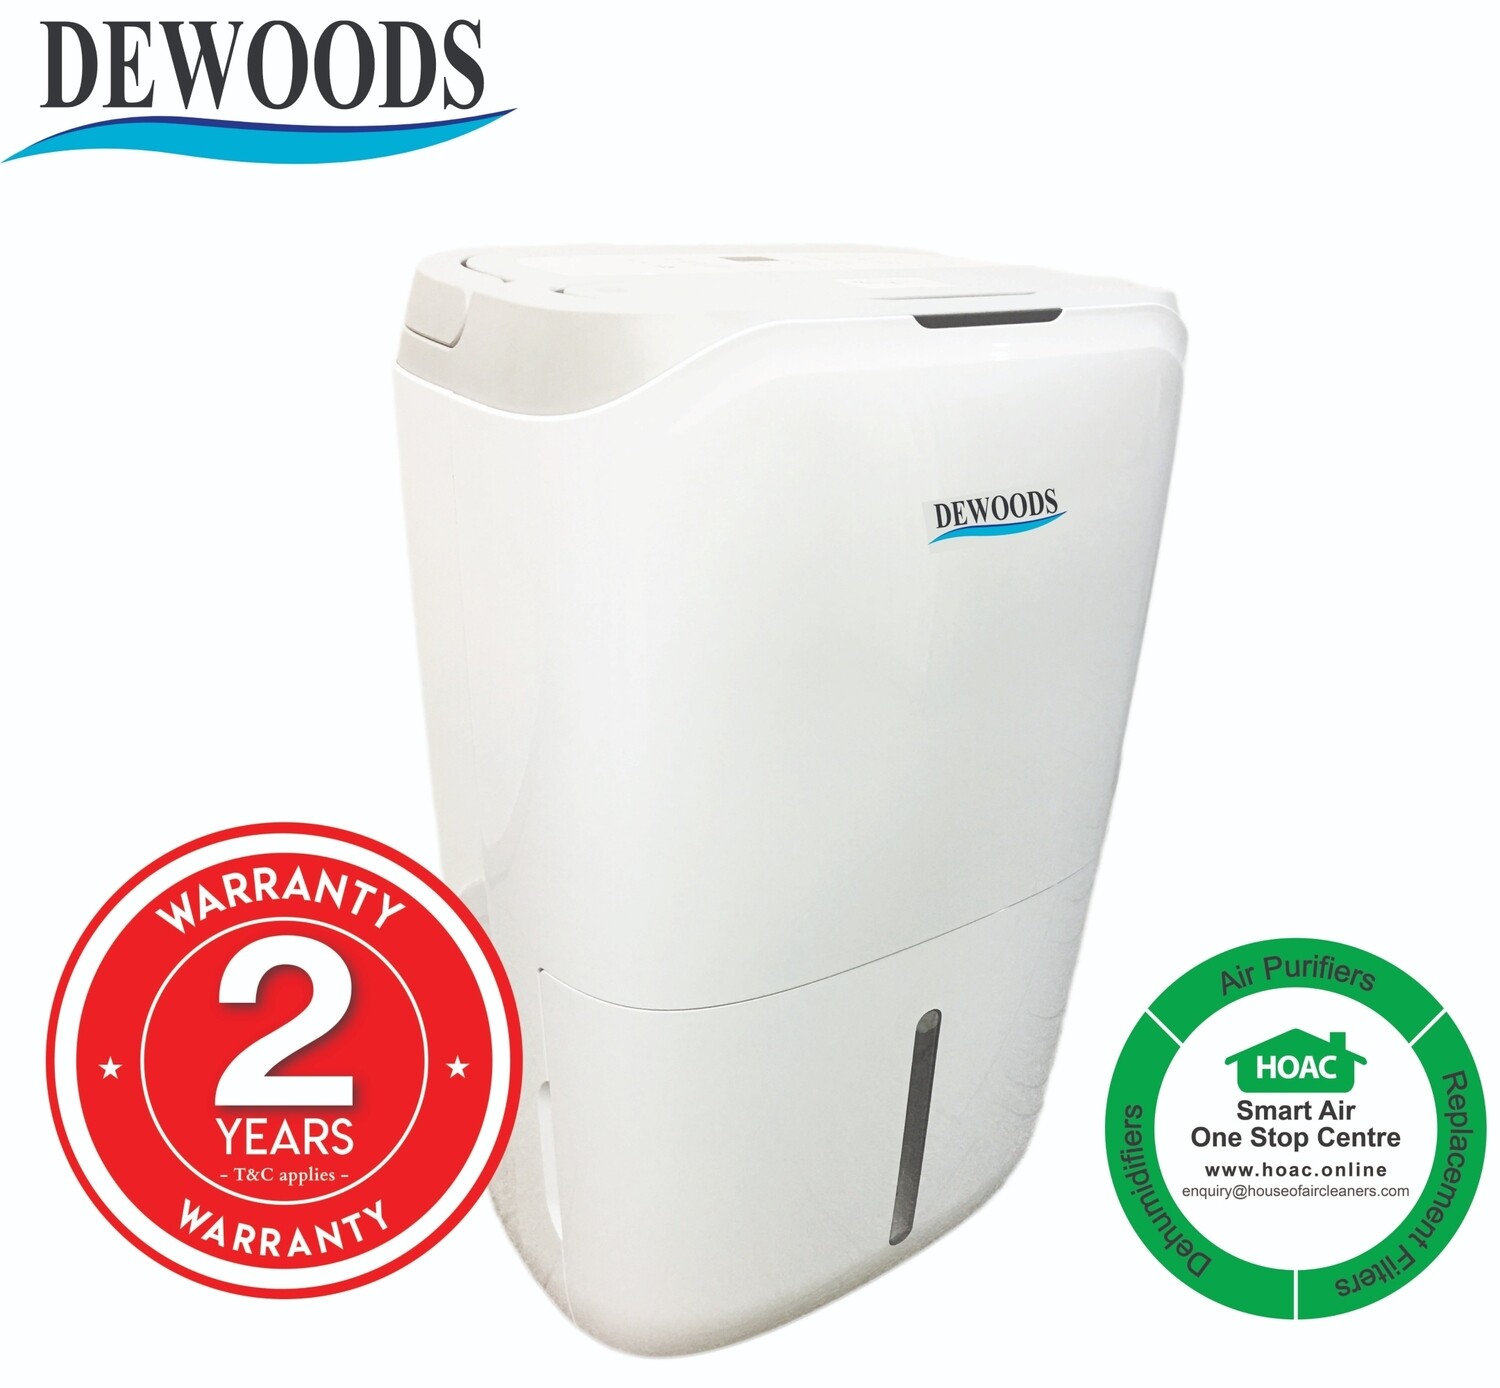 DEWOODS Dehumidifier MDH-20A (20 Litres) With 2 YEARS WARRANTY